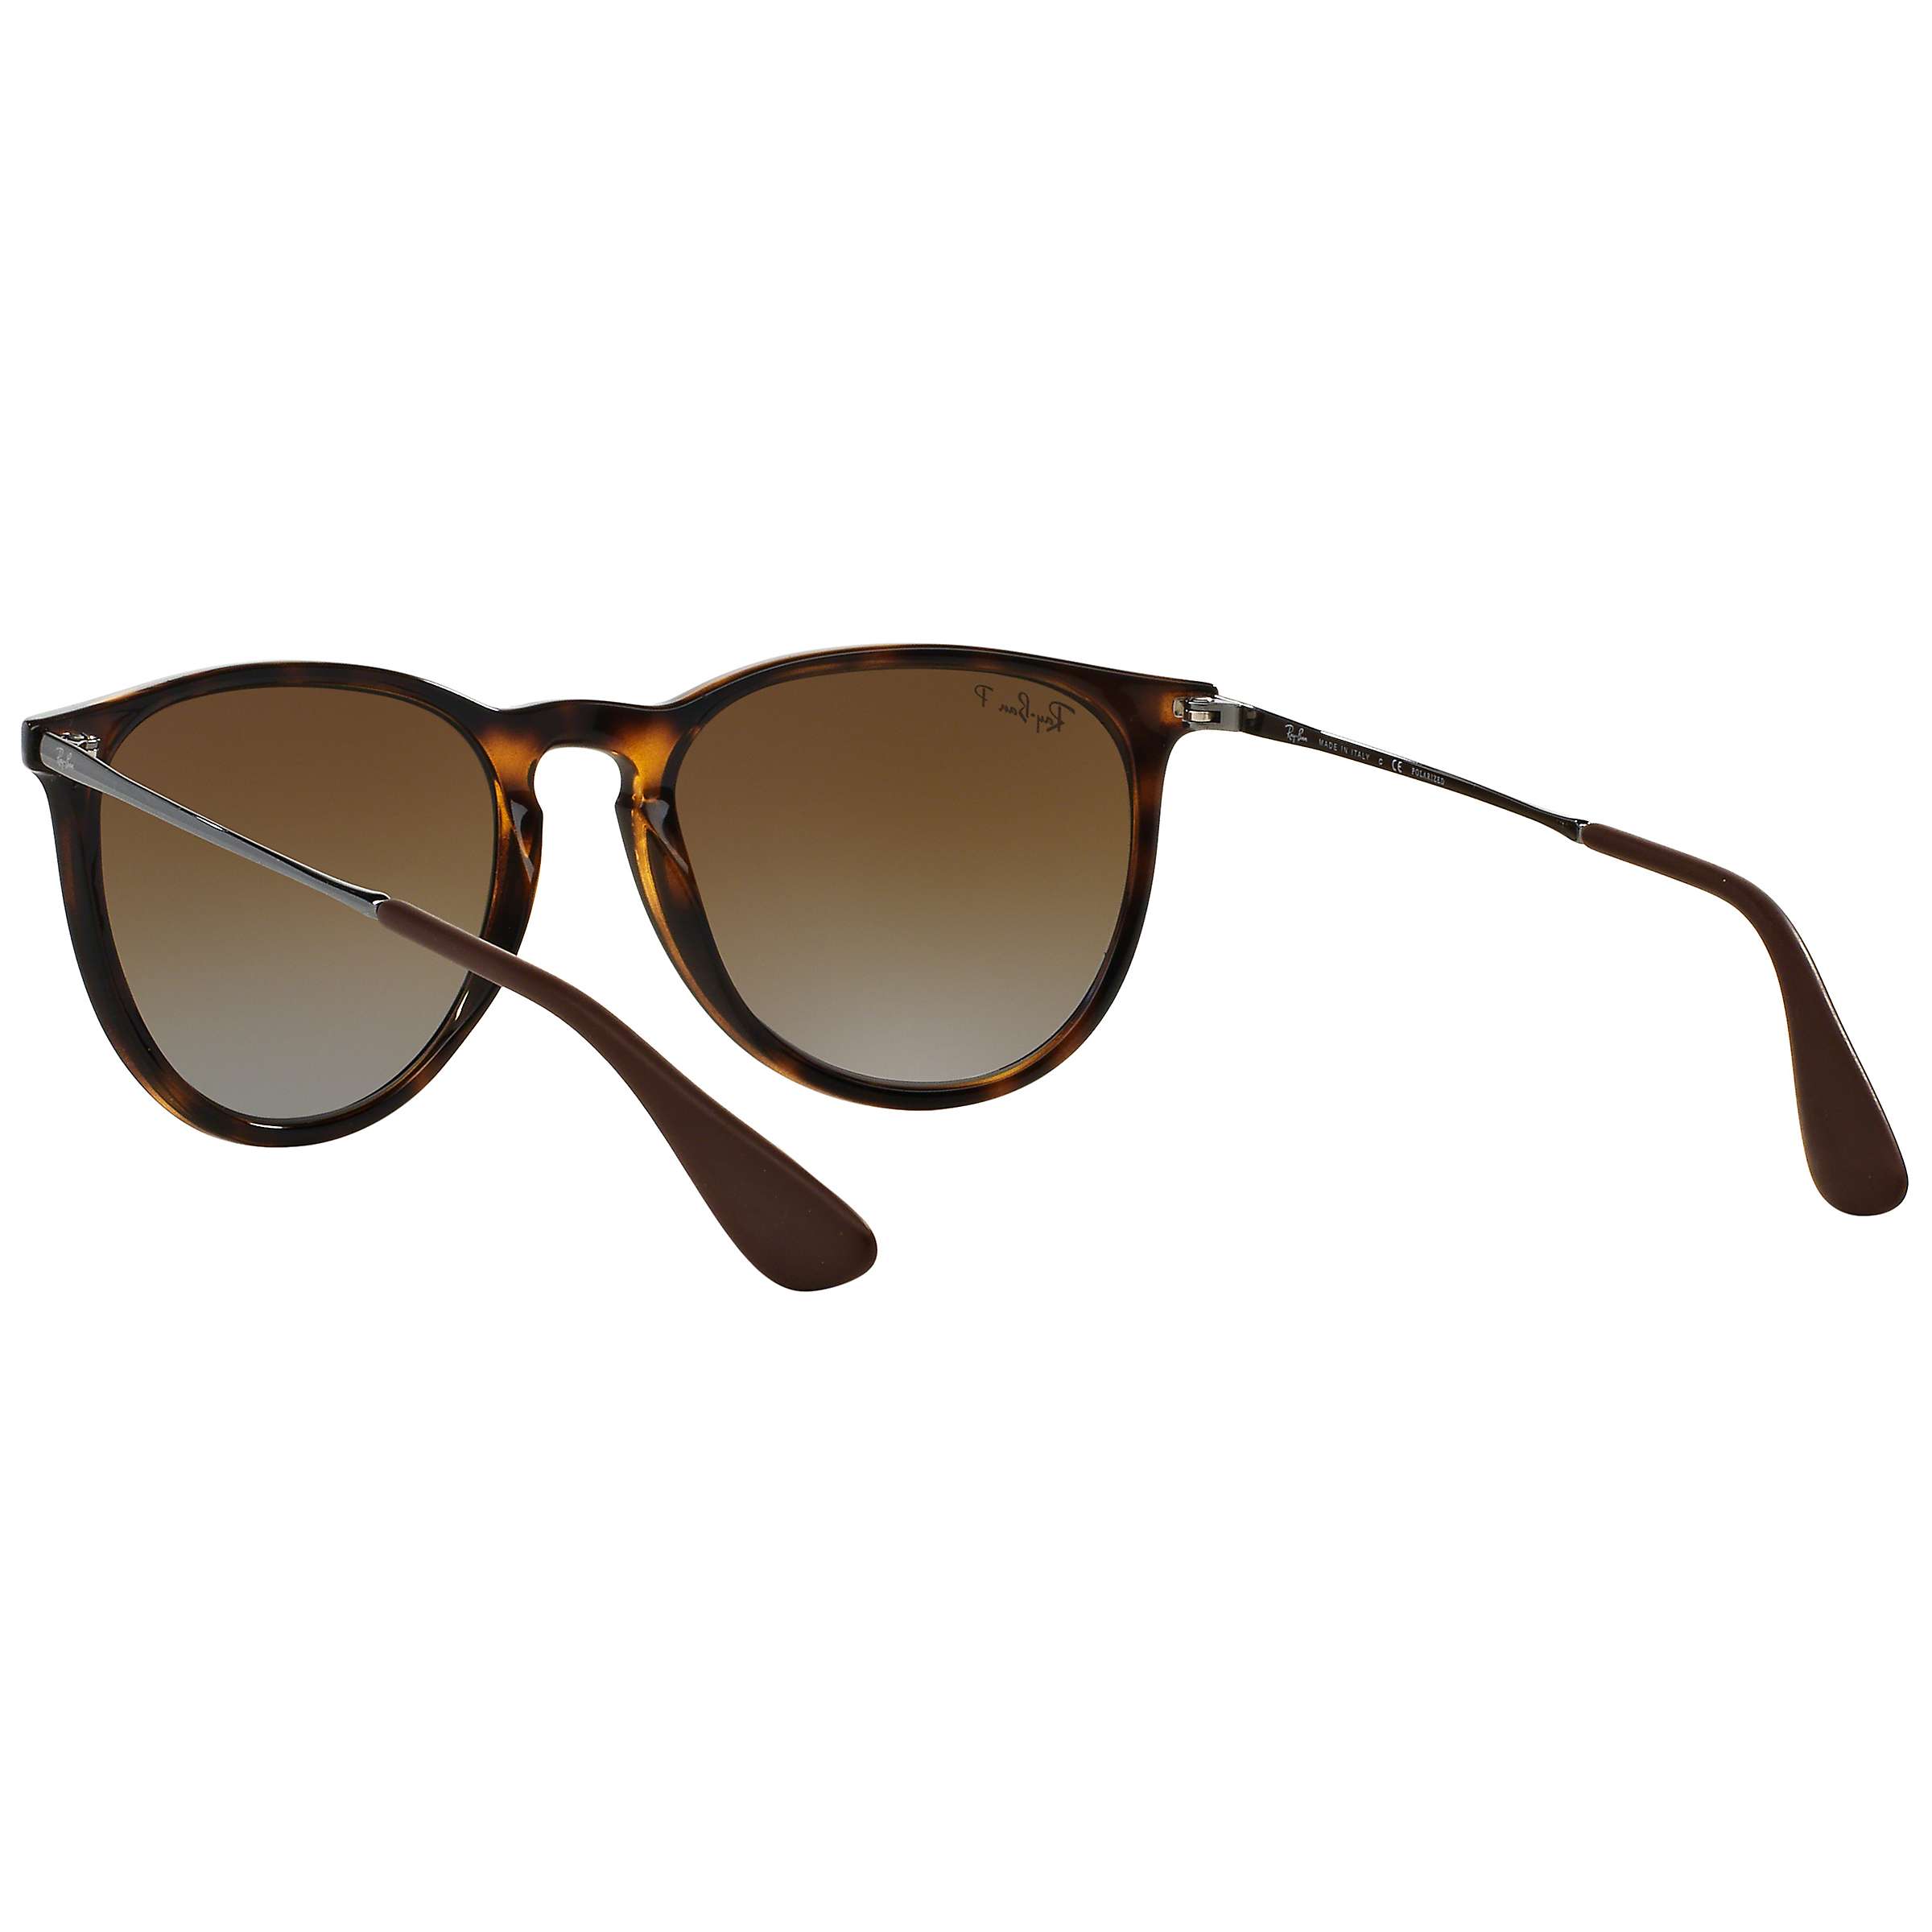 Buzz area Extensively Ray-Ban RB4171 Women's Erika Polarised Oval Sunglasses, Tortoise/Brown  Gradient at John Lewis & Partners